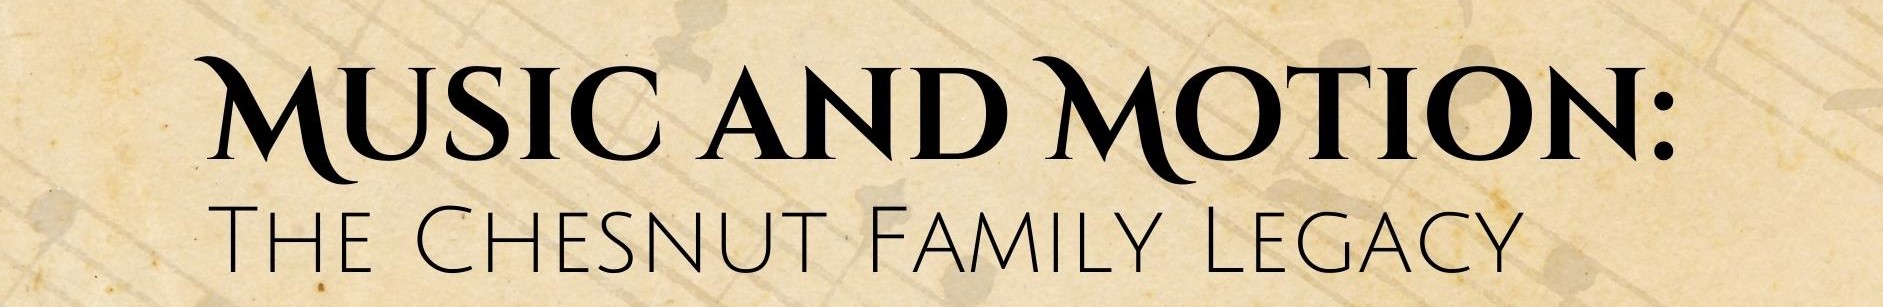 Music and Motion: The Chesnut Family Legacy